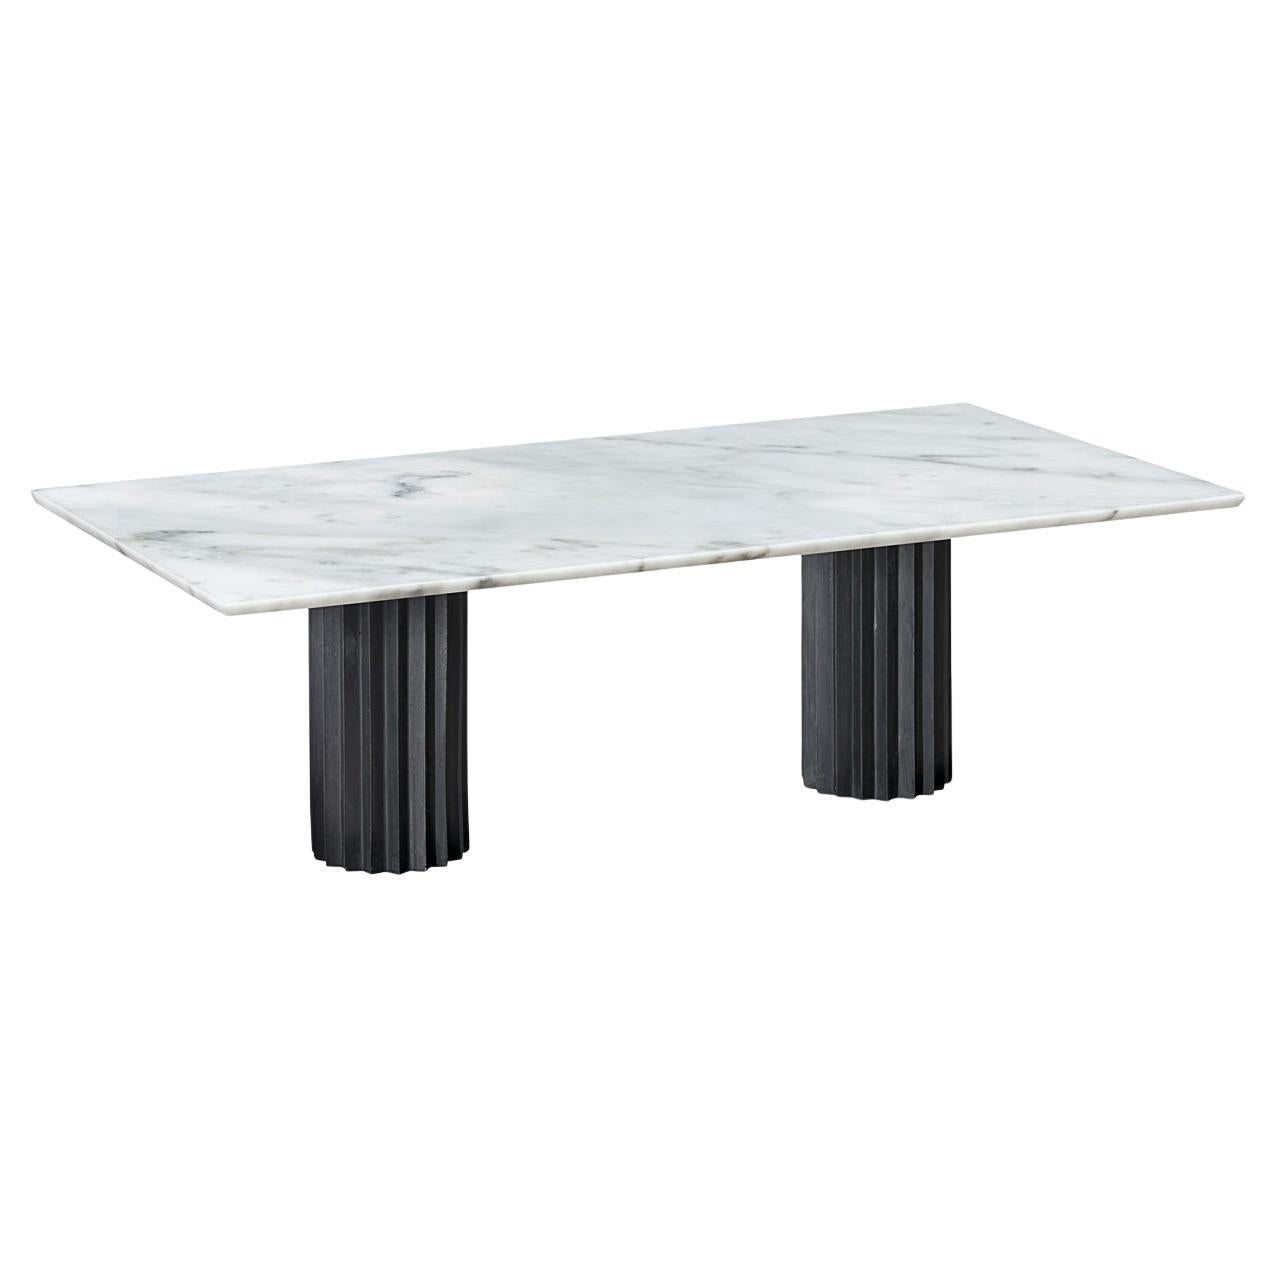 Doris White Carrara Marble Rectangular Dining Table by Fred and Juul